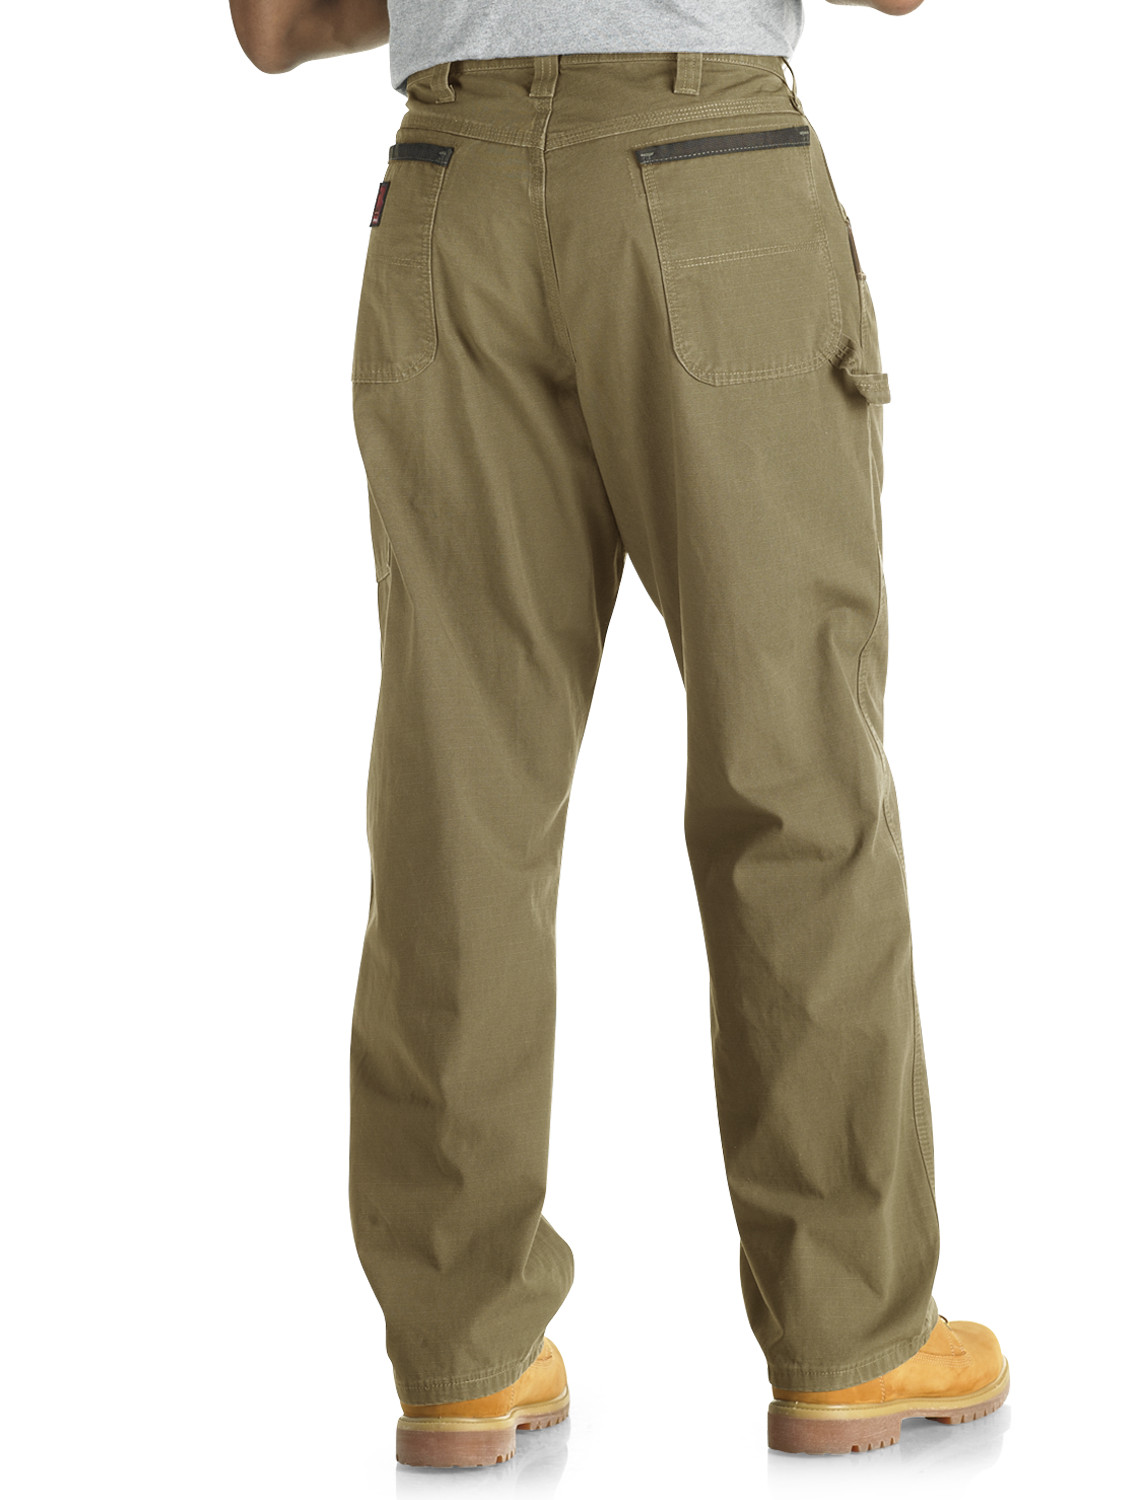 Mens Cargo Pants with Multiple Pockets Clearance Relaxed Fit Stretch  Outdoor Carpenter Pants for Man,Khaki Size 5XL